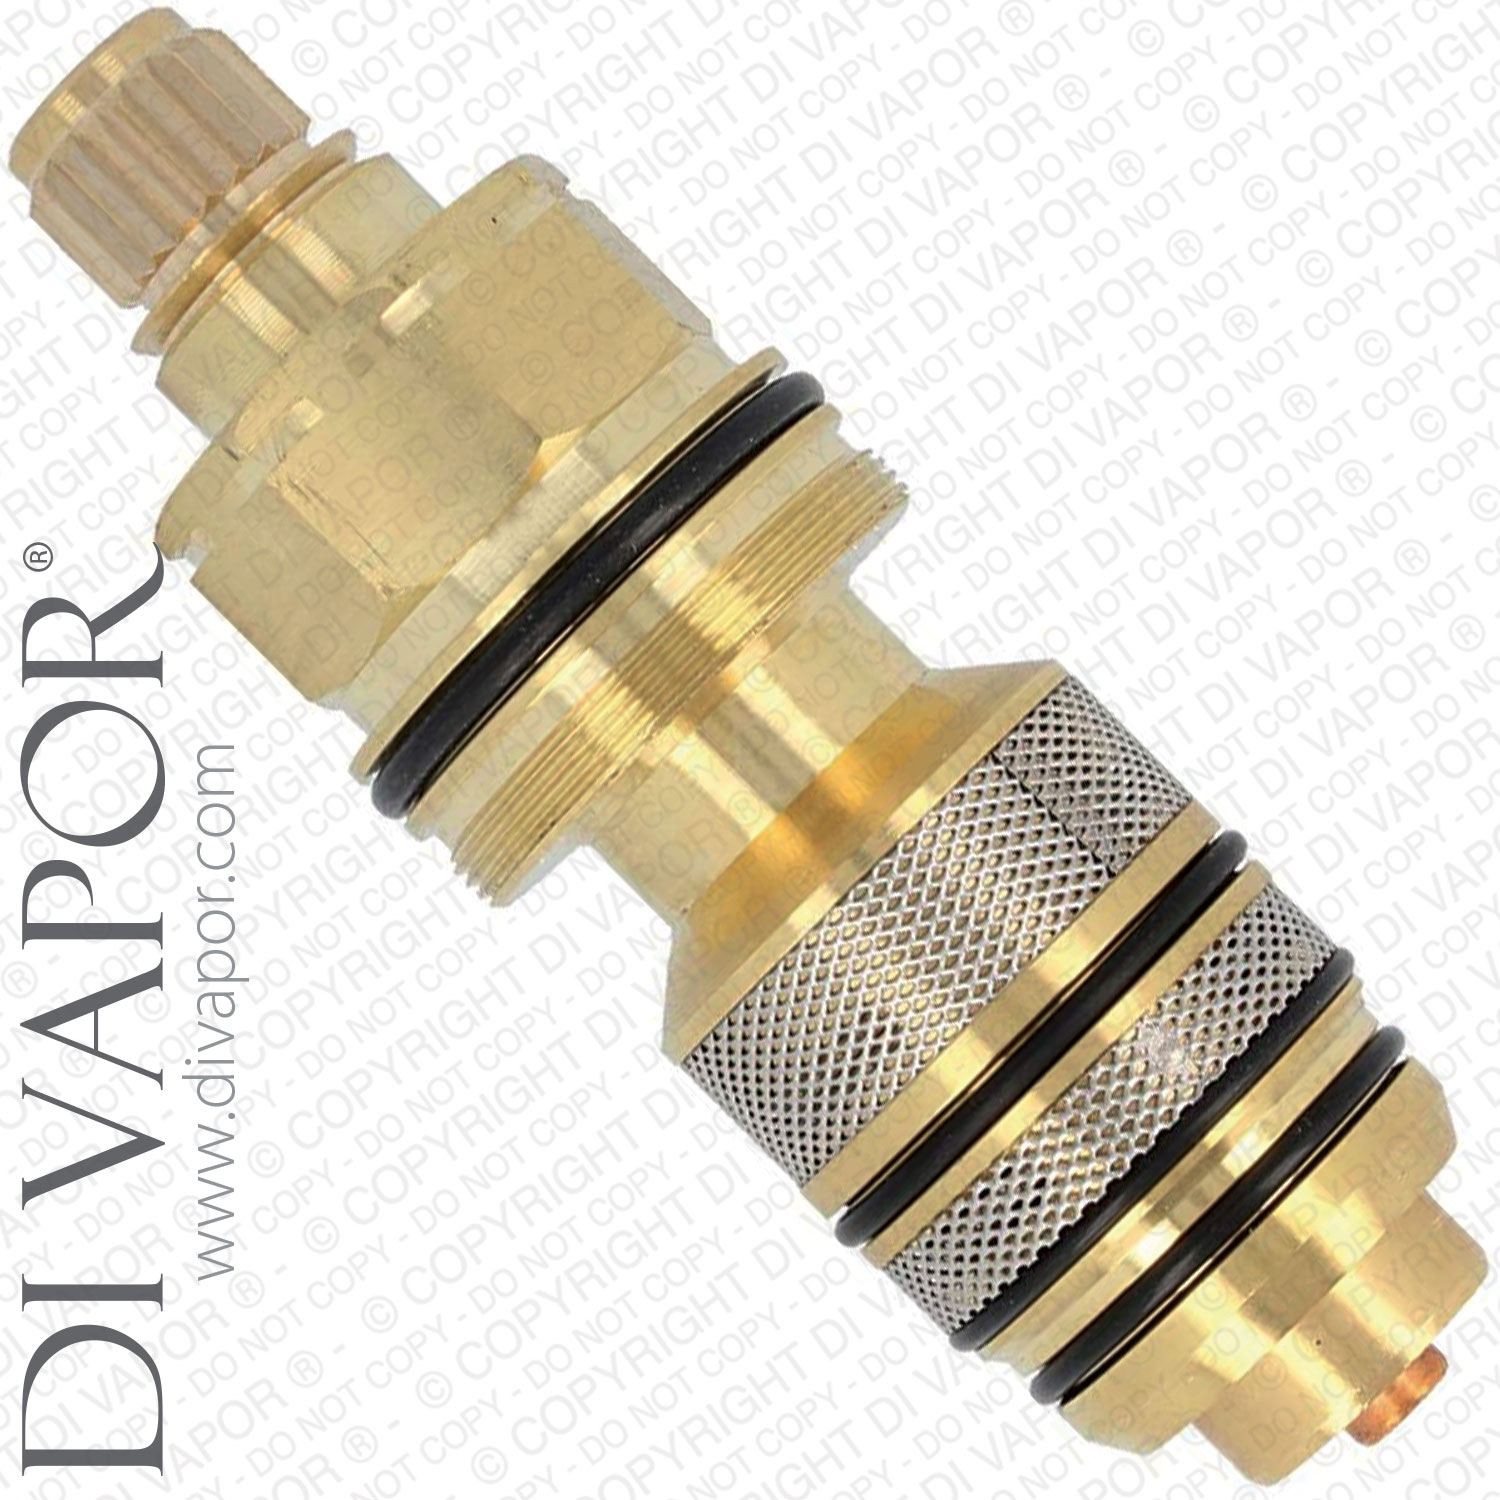 Swadling Invincible Thermostatic Cartridge